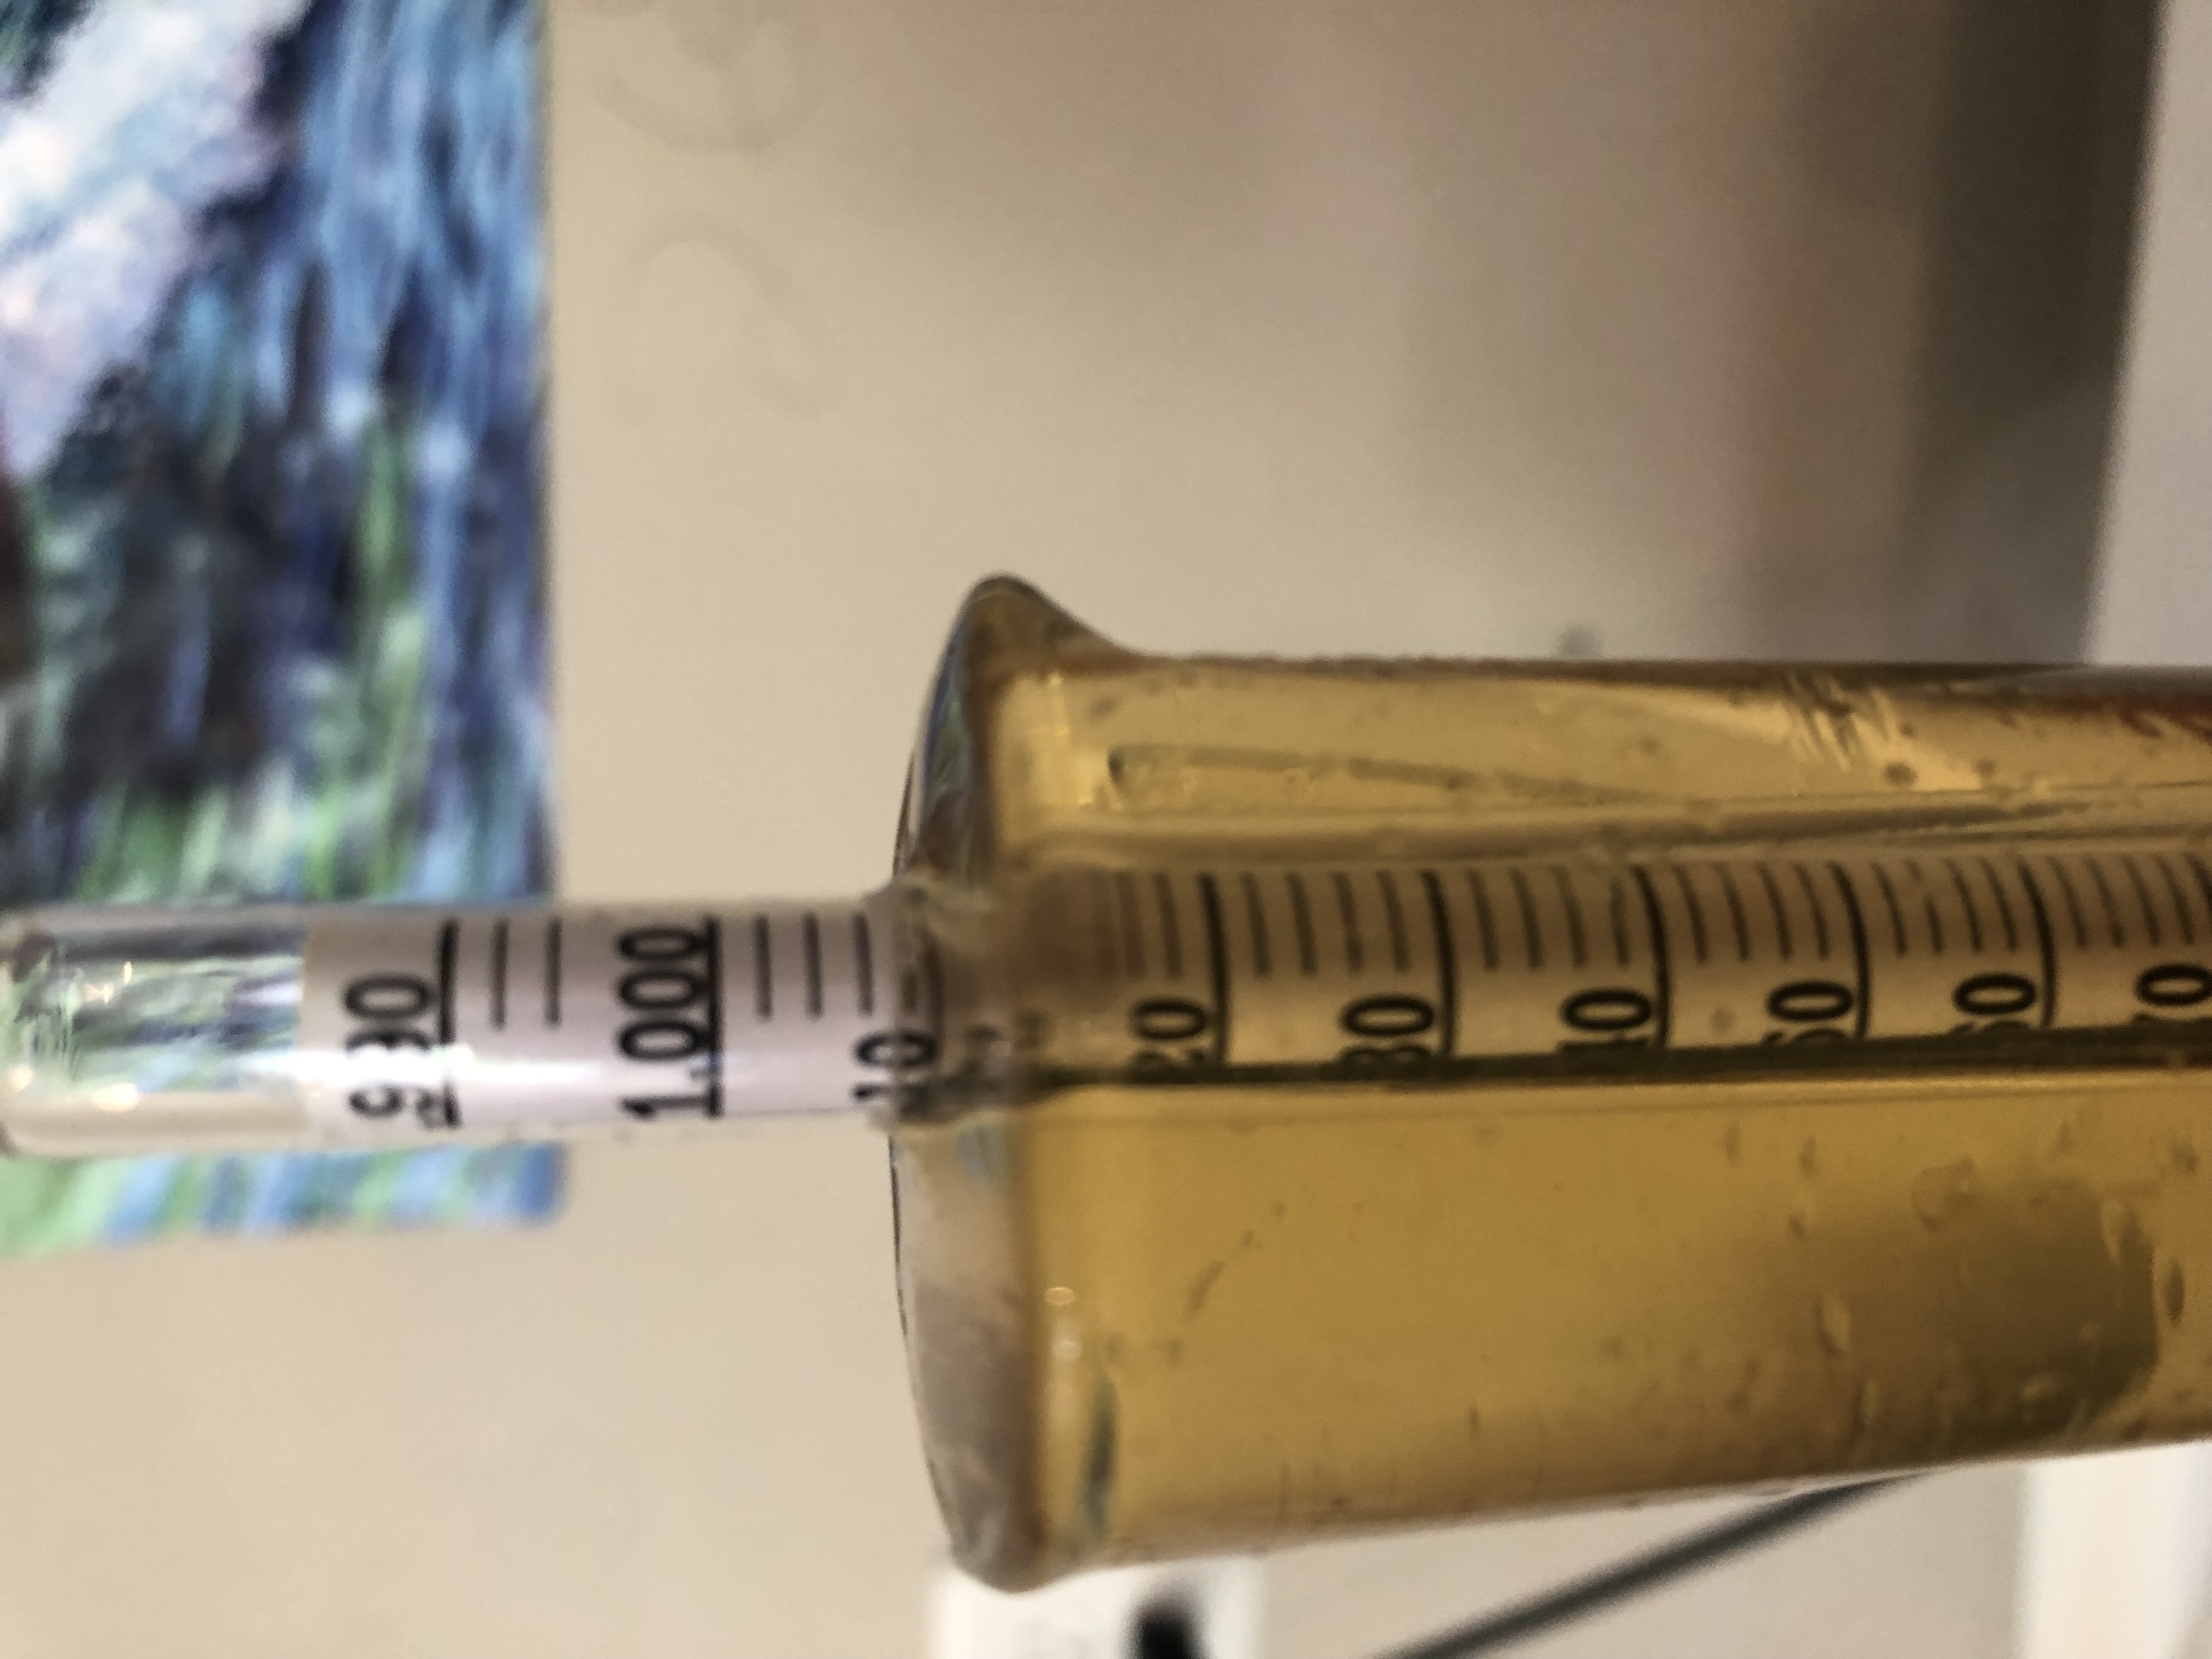 Good closeup view of hydrometer scale in wort sample